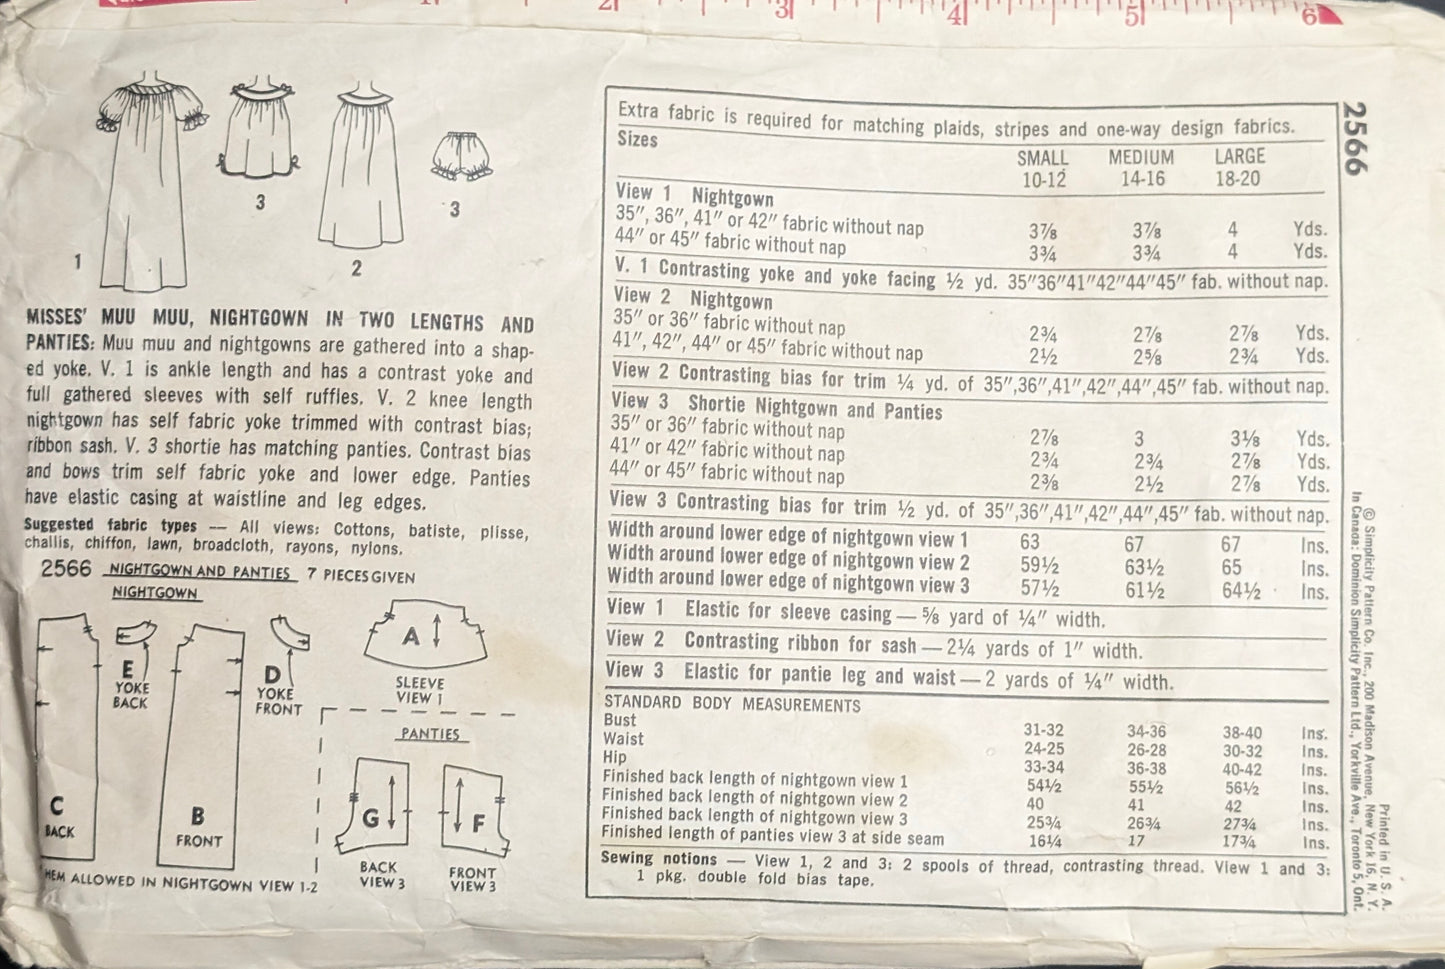 1960s Original Vintage Sewing Pattern: Simplicity 2566 Size Small